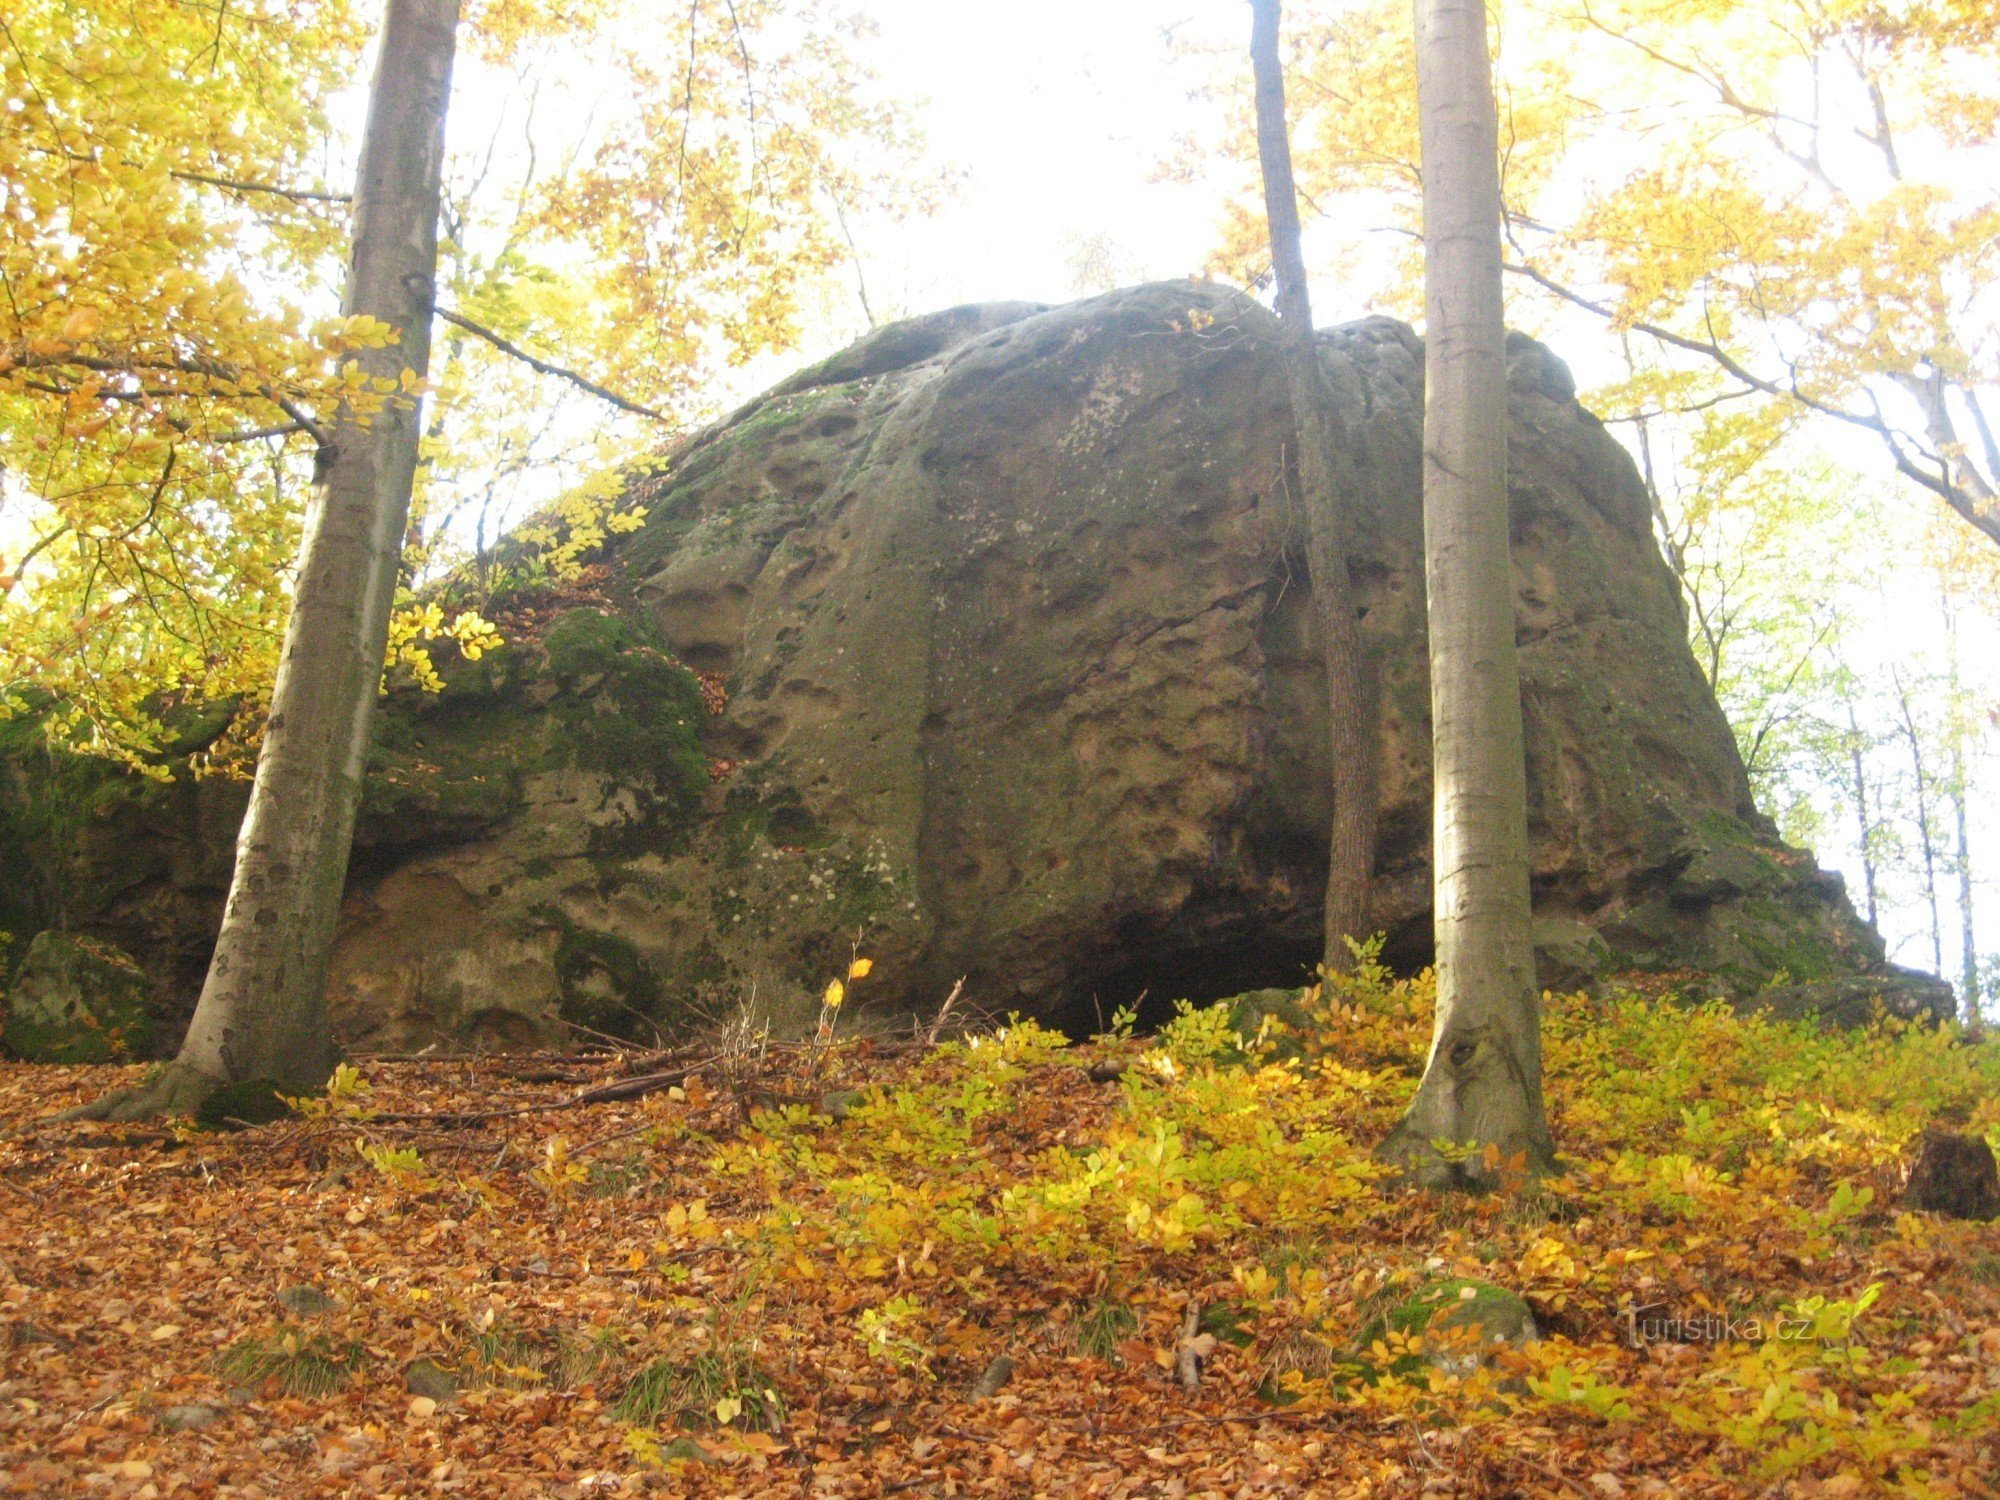 Rock formations of the Mladcov hills